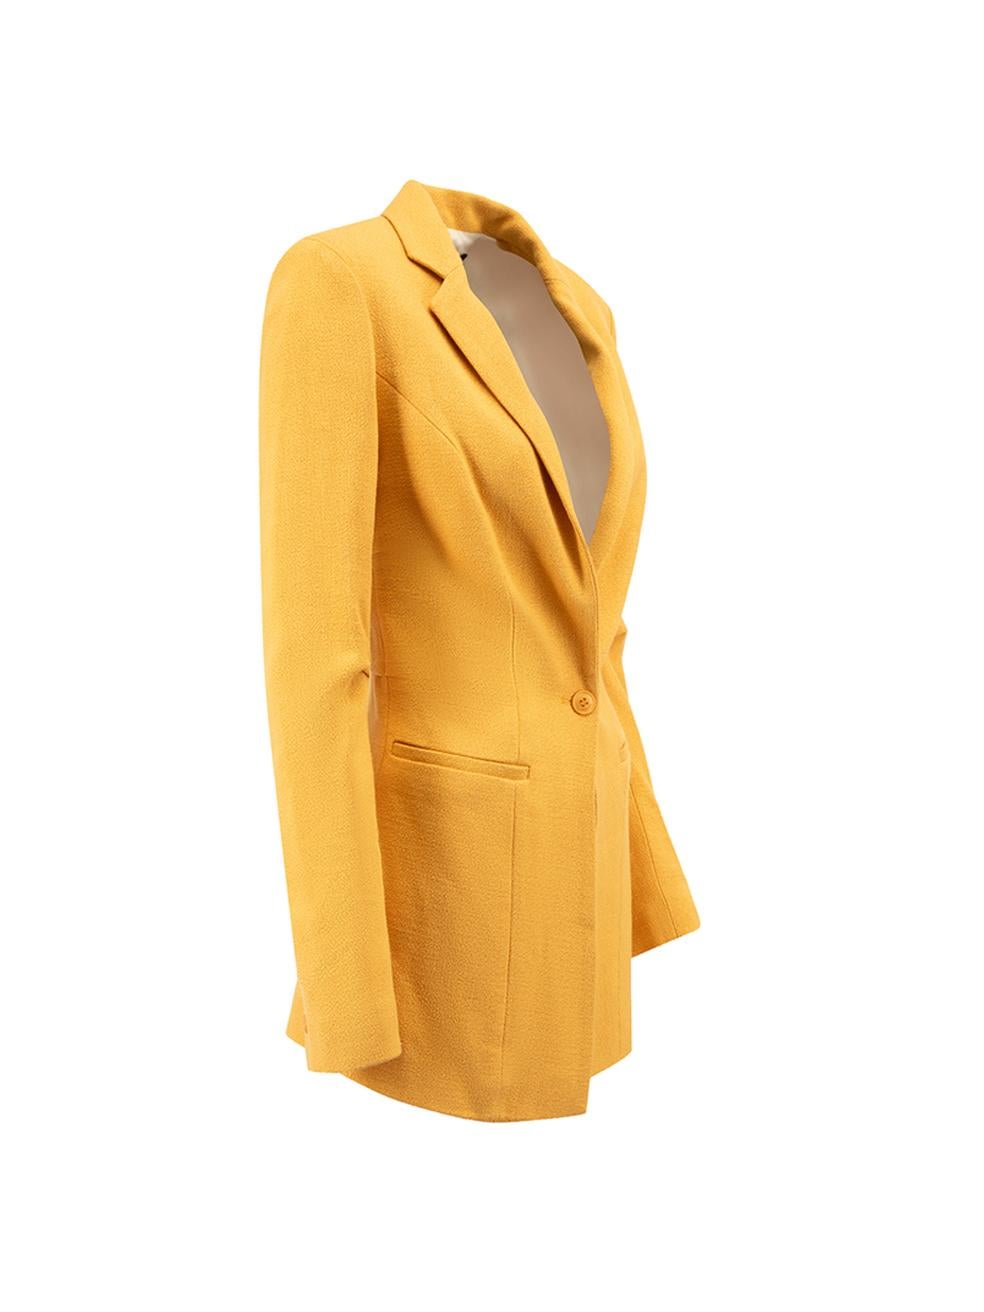 CONDITION is Never worn, with tags. No visible wear to jacket is evident on this new Jacquemus designer resale item.
  
Details
Orange
Viscose
Blazer
Button fastening
Button detail cuffs
2x Front pockets
  
Made in Romania
  
Composition
92%